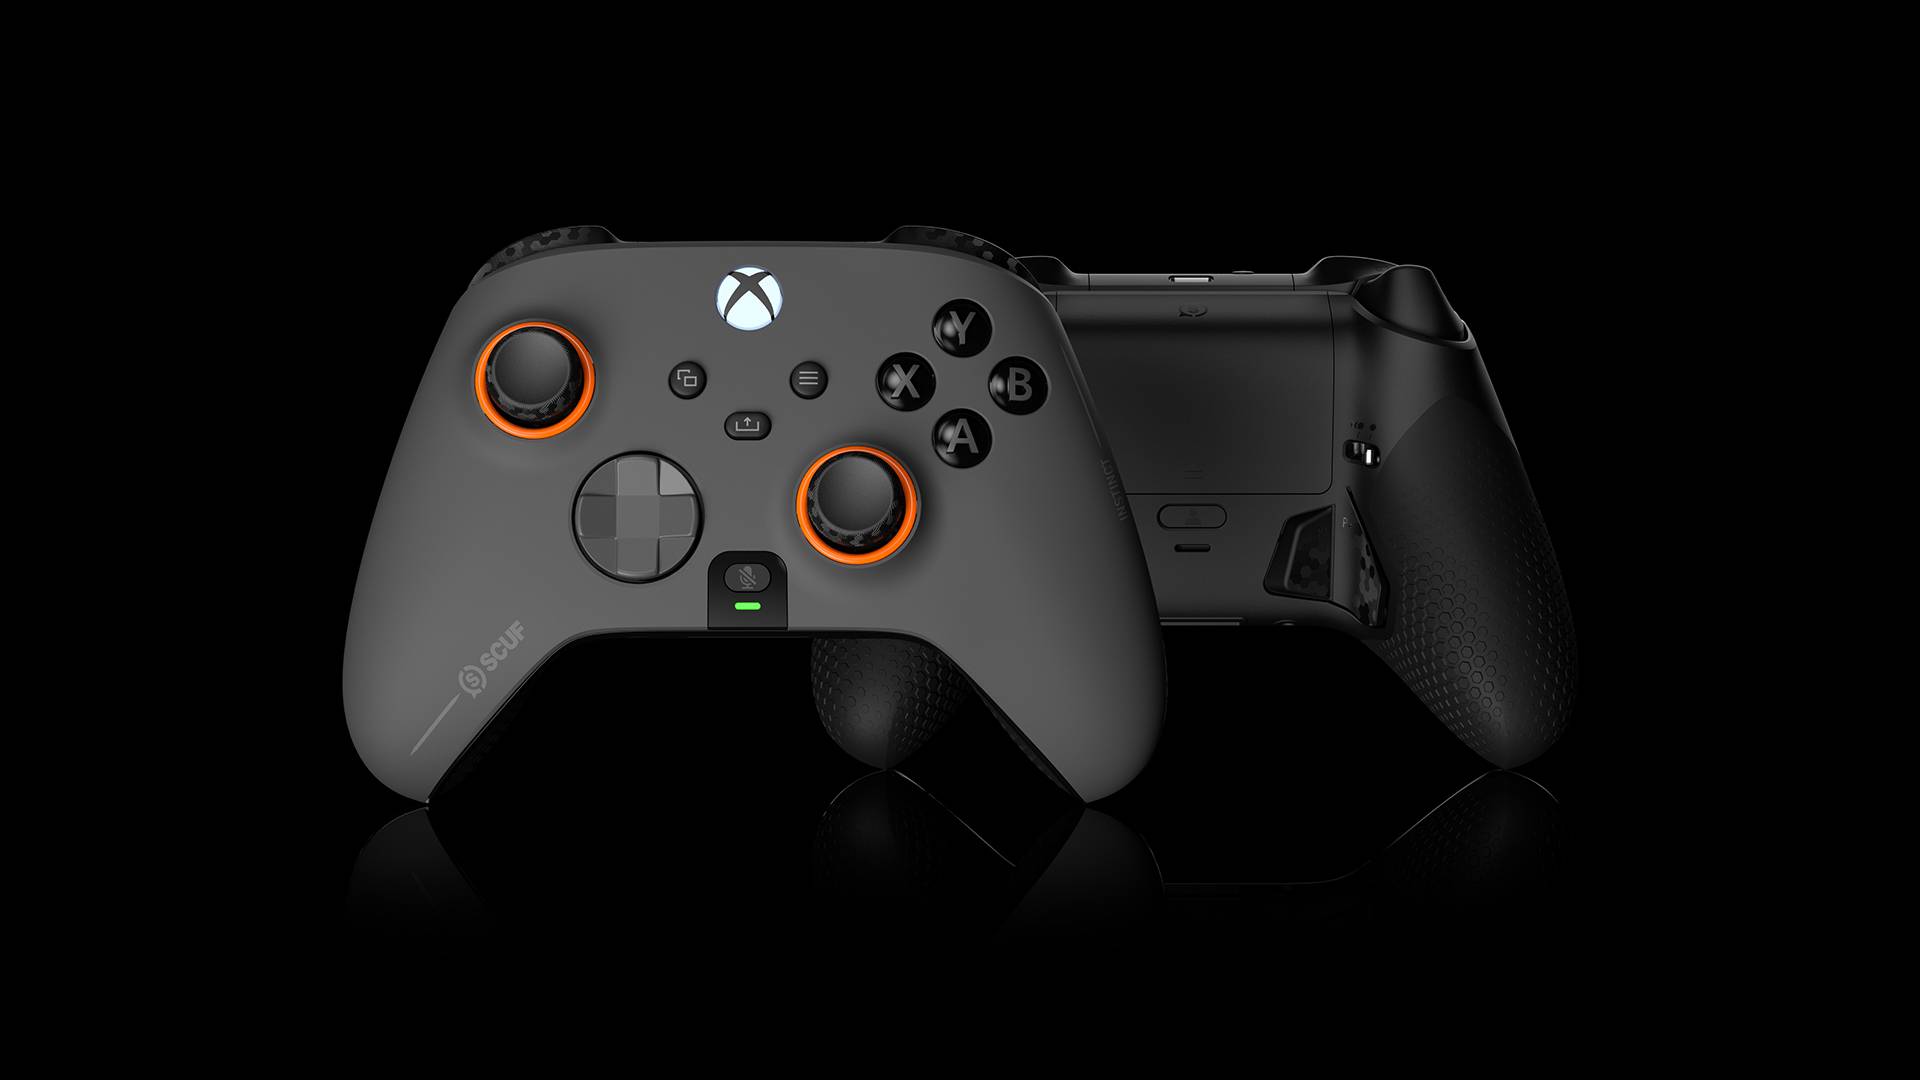 SCUF Instinct Pro controller front and back